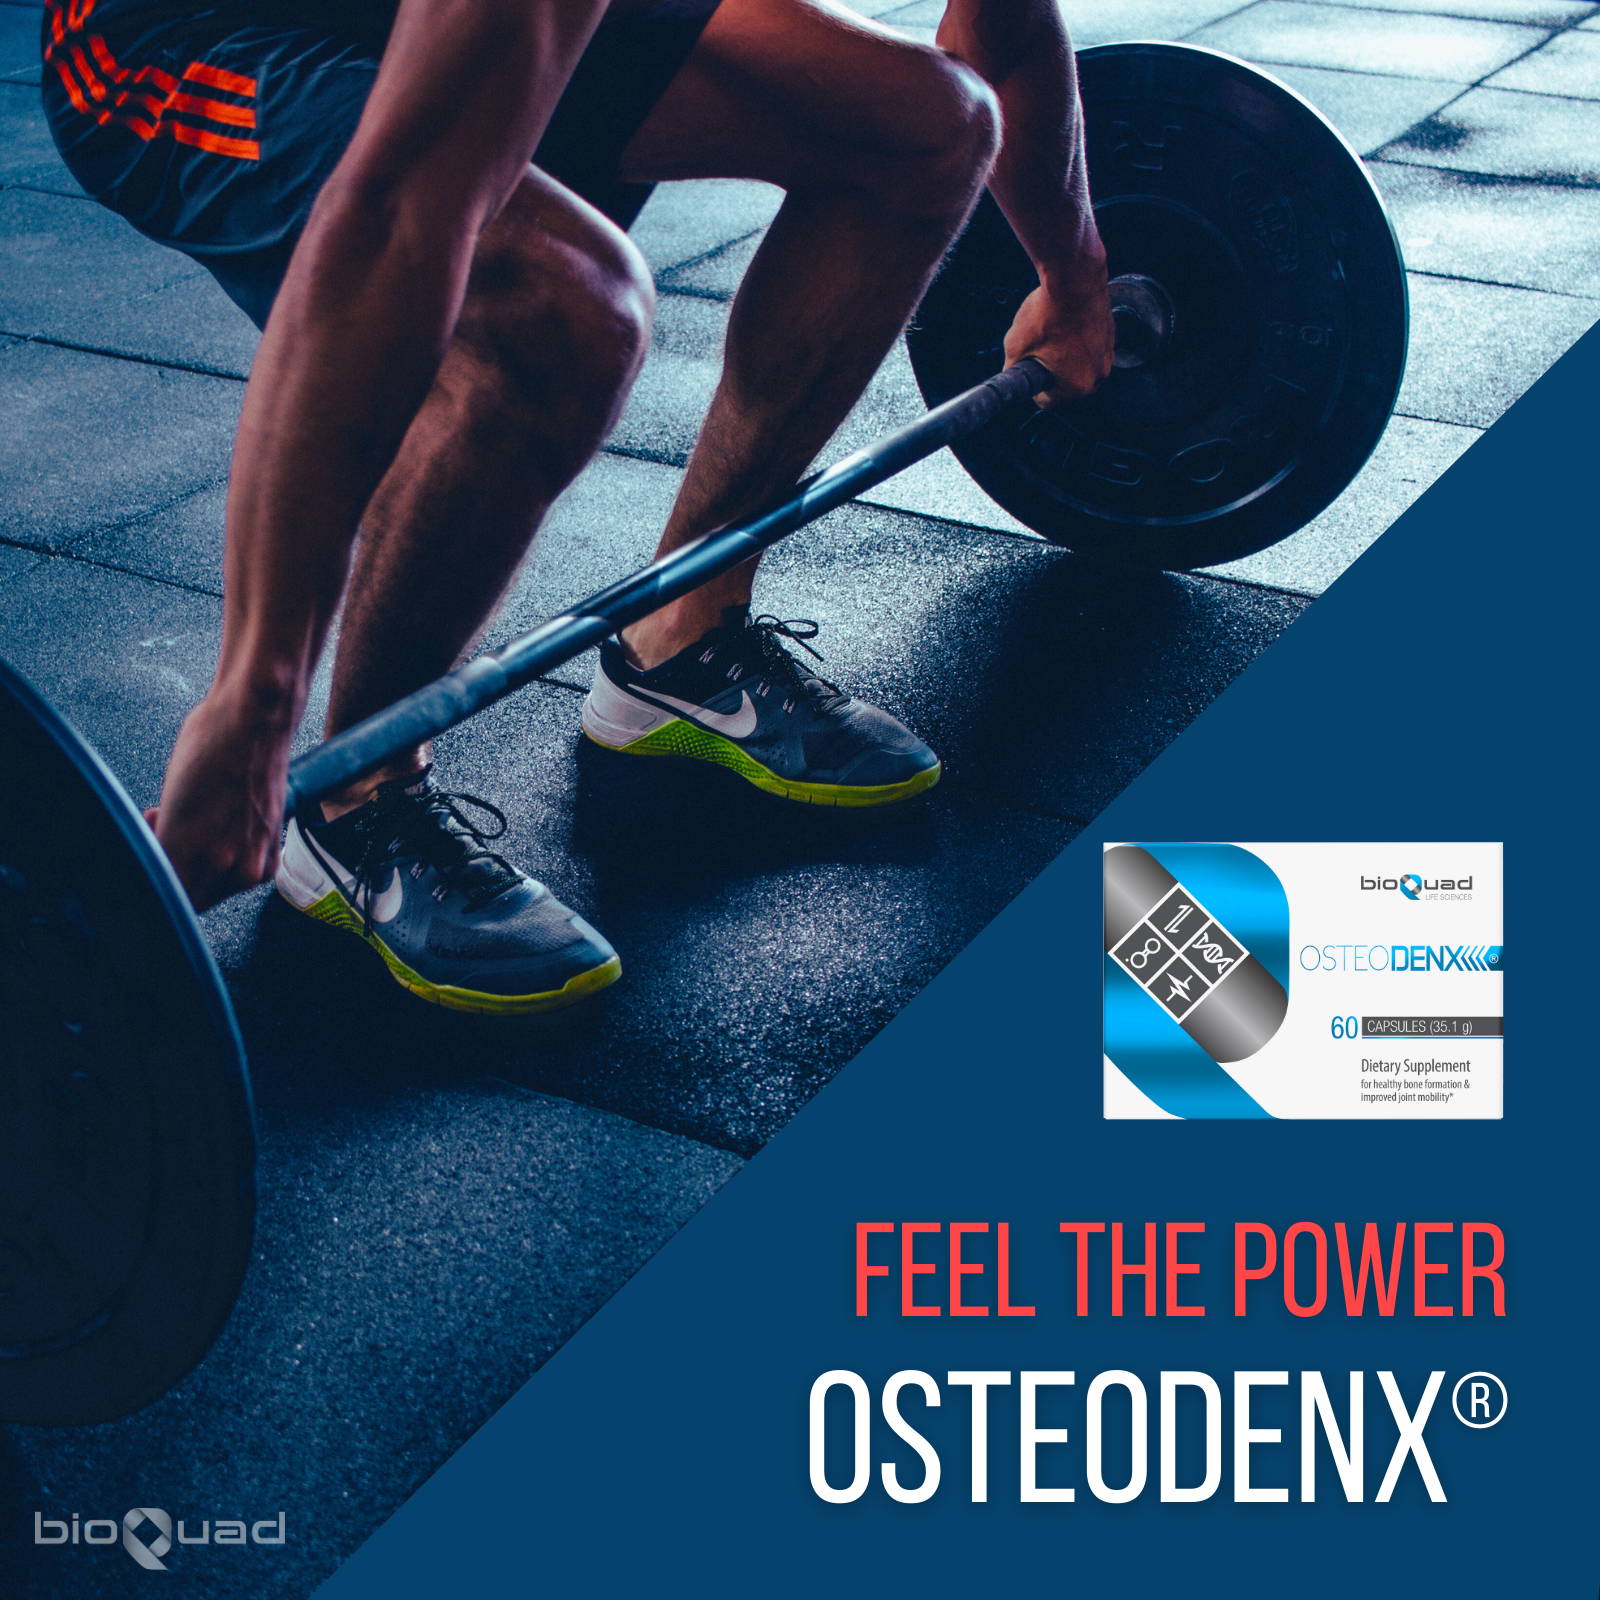 Weightlifter performing a deadlift with a caption 'FEEL THE POWER OSTEODENX®' alongside the bioQuad OsteoDenx® supplement packaging, emphasizing strength and joint support.